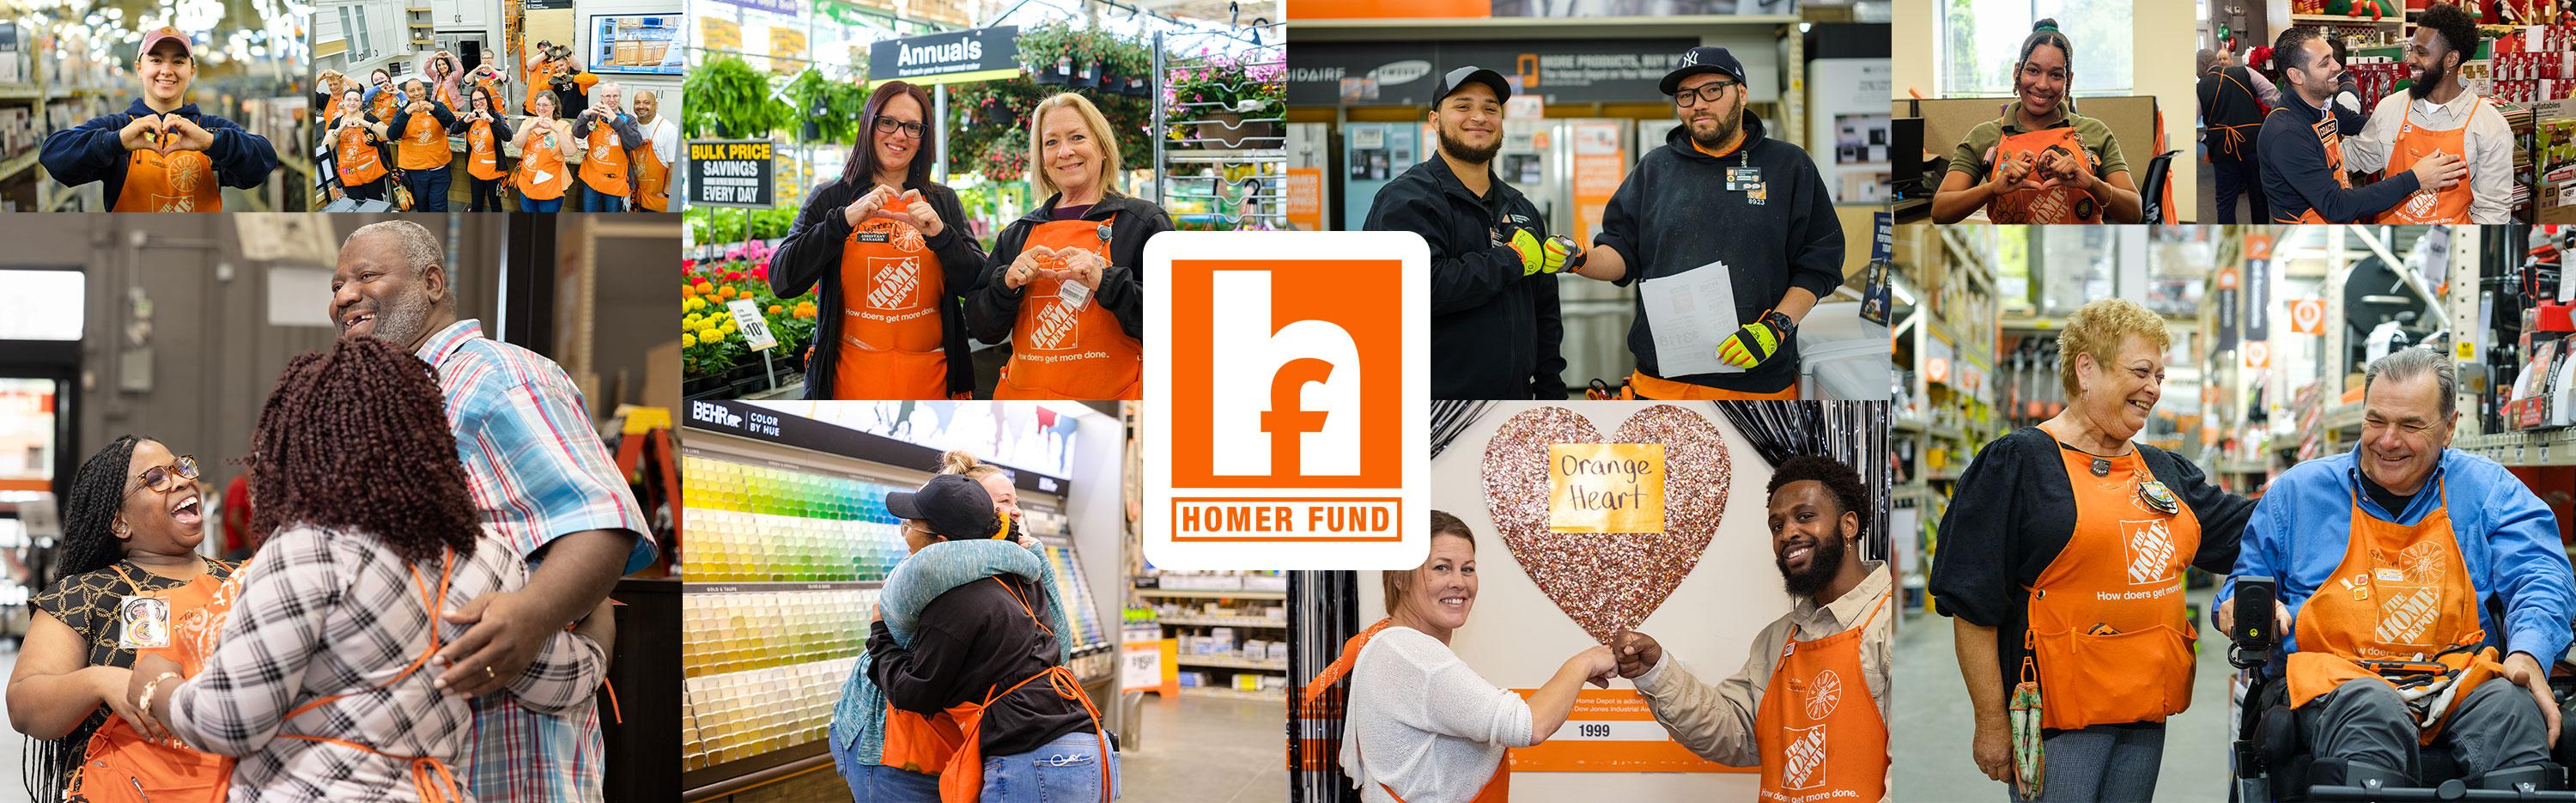 Homer Fund page banner image featuring associates 